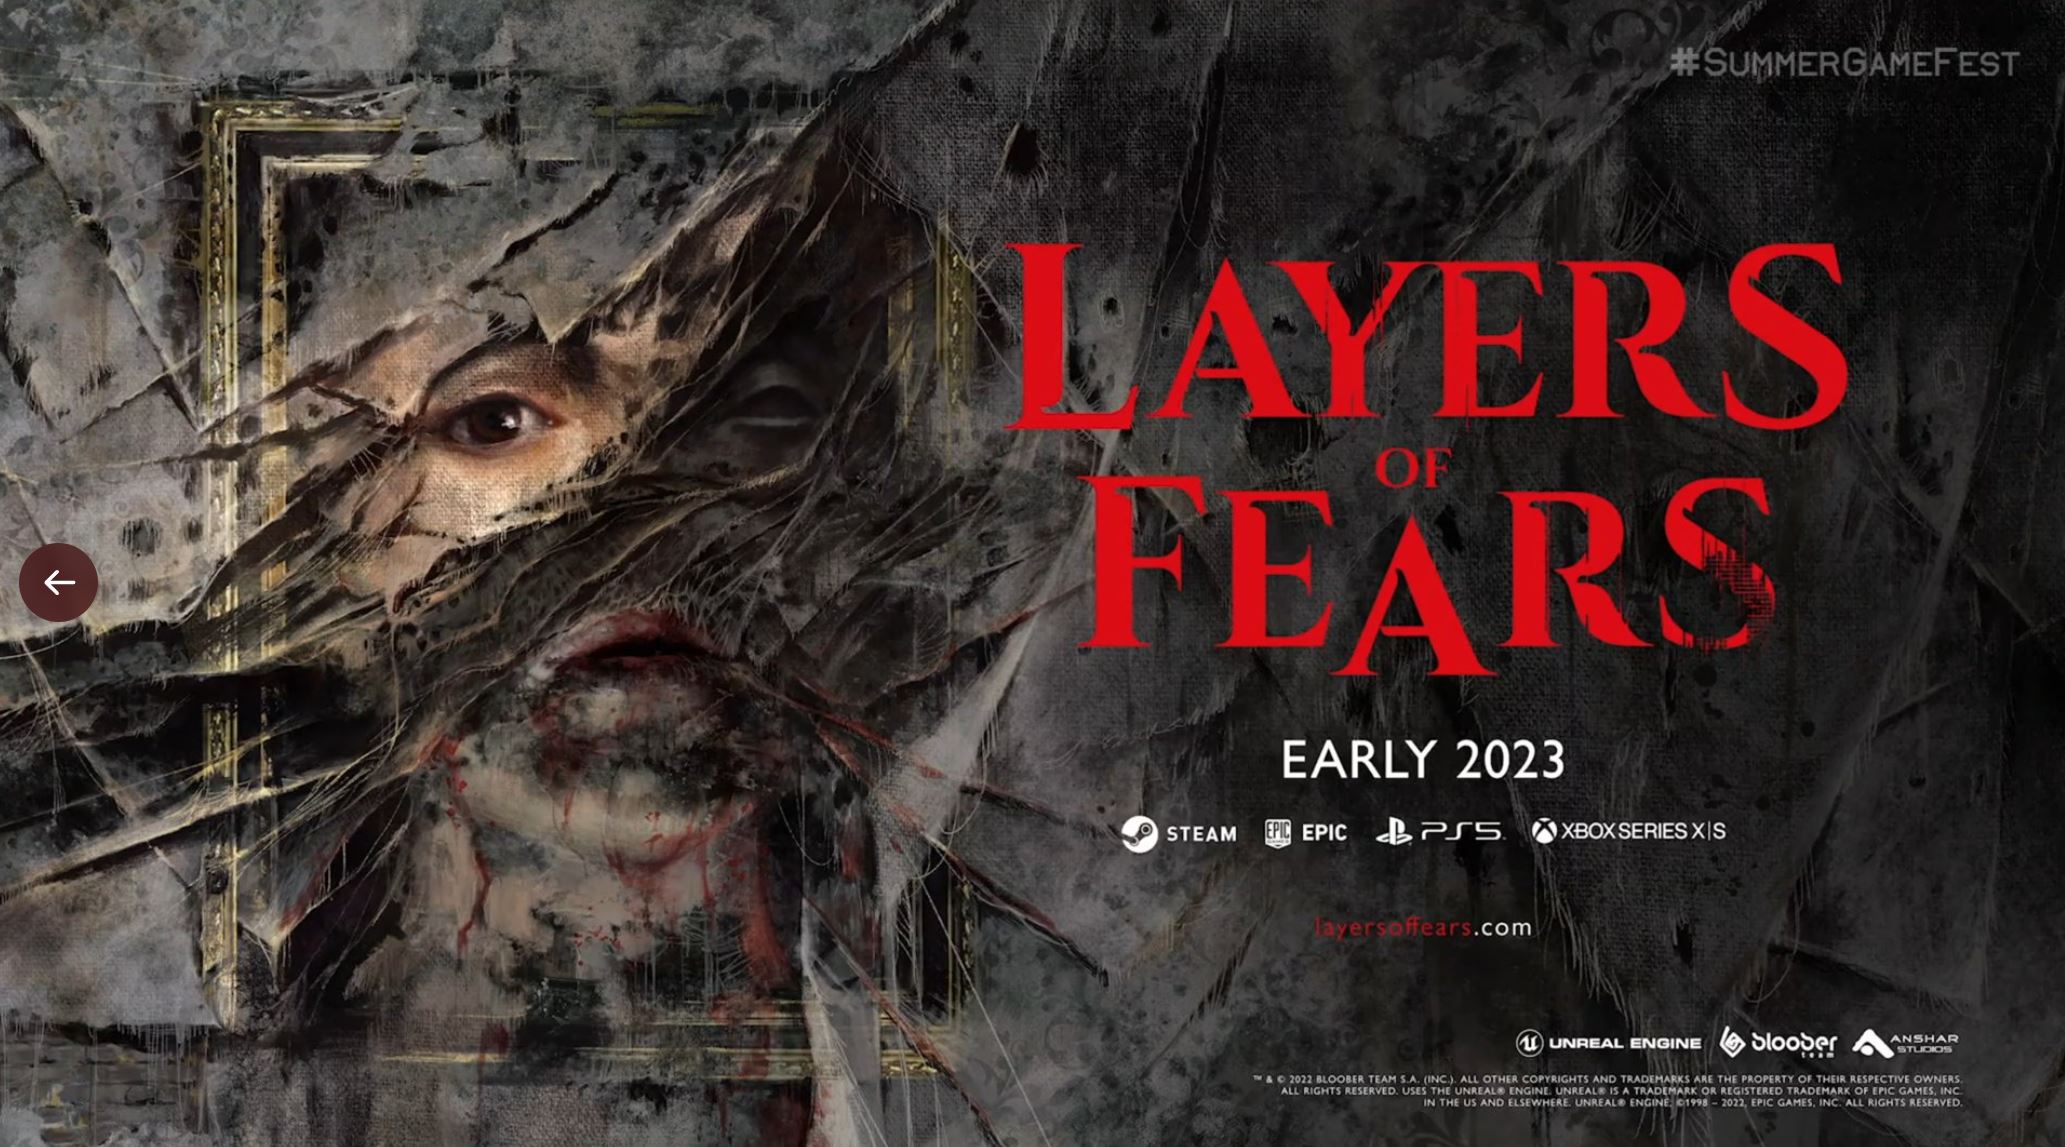 Bloober Team’s Layers of Fears is coming to PS5, Xbox Series XS and PC